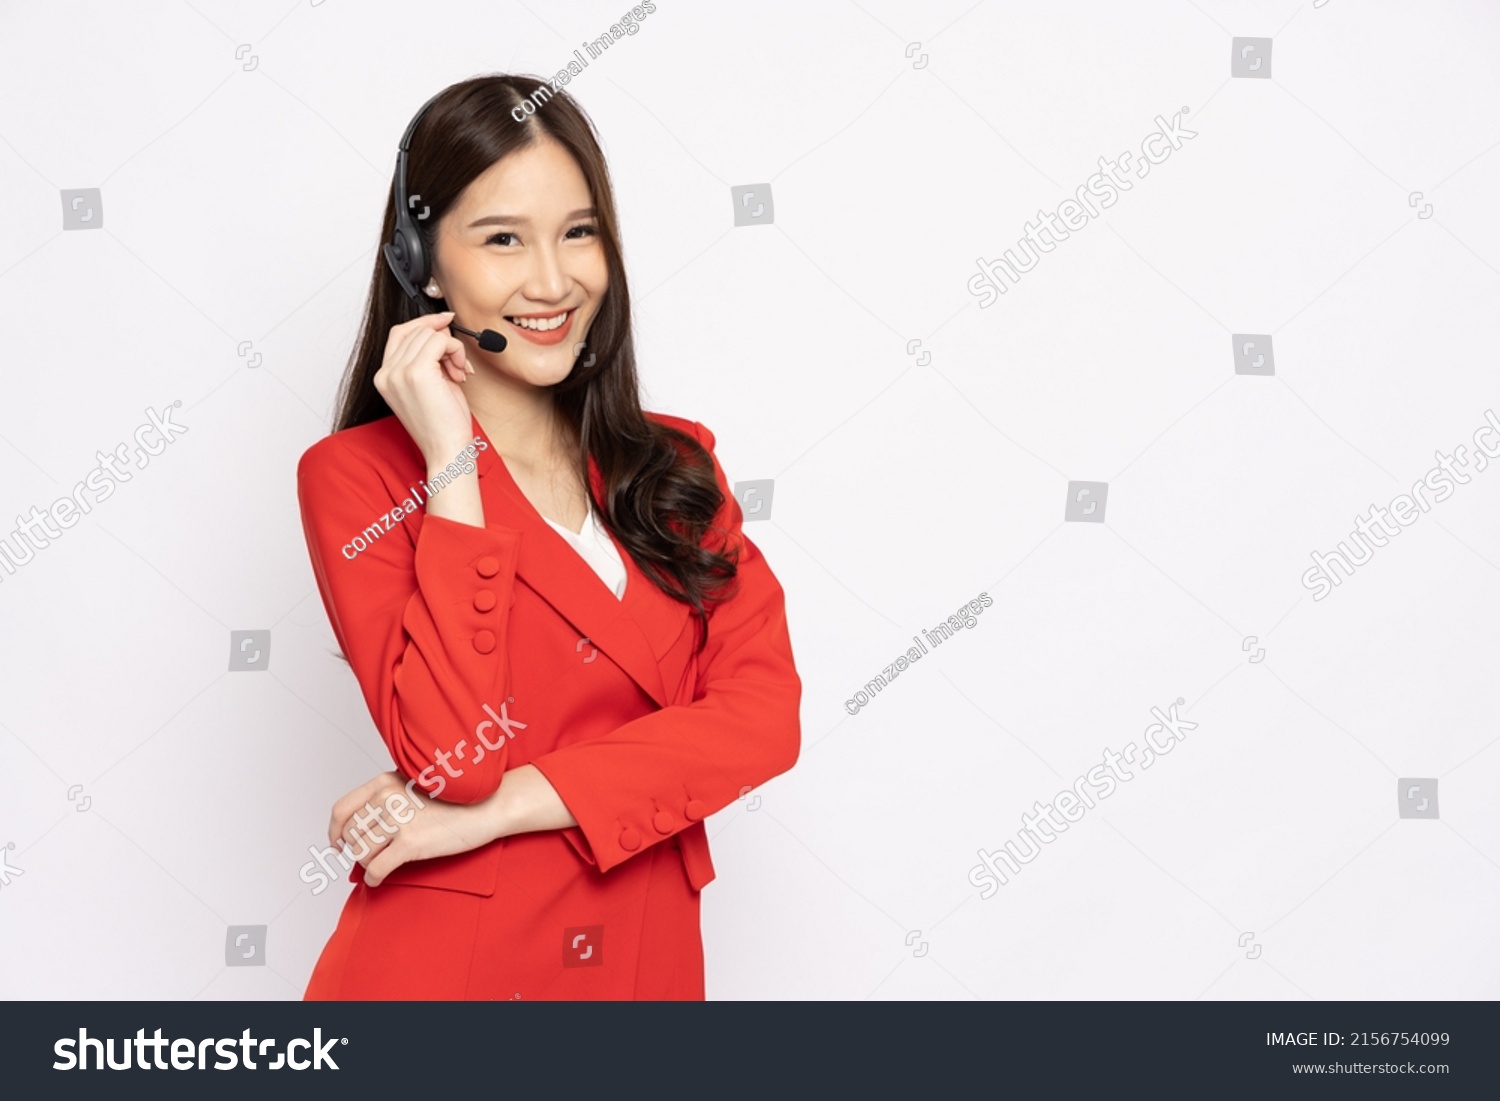 Young Asian businesswoman call center with headsets isolated over white background, Telemarketing sales or Customer service operators concept #2156754099